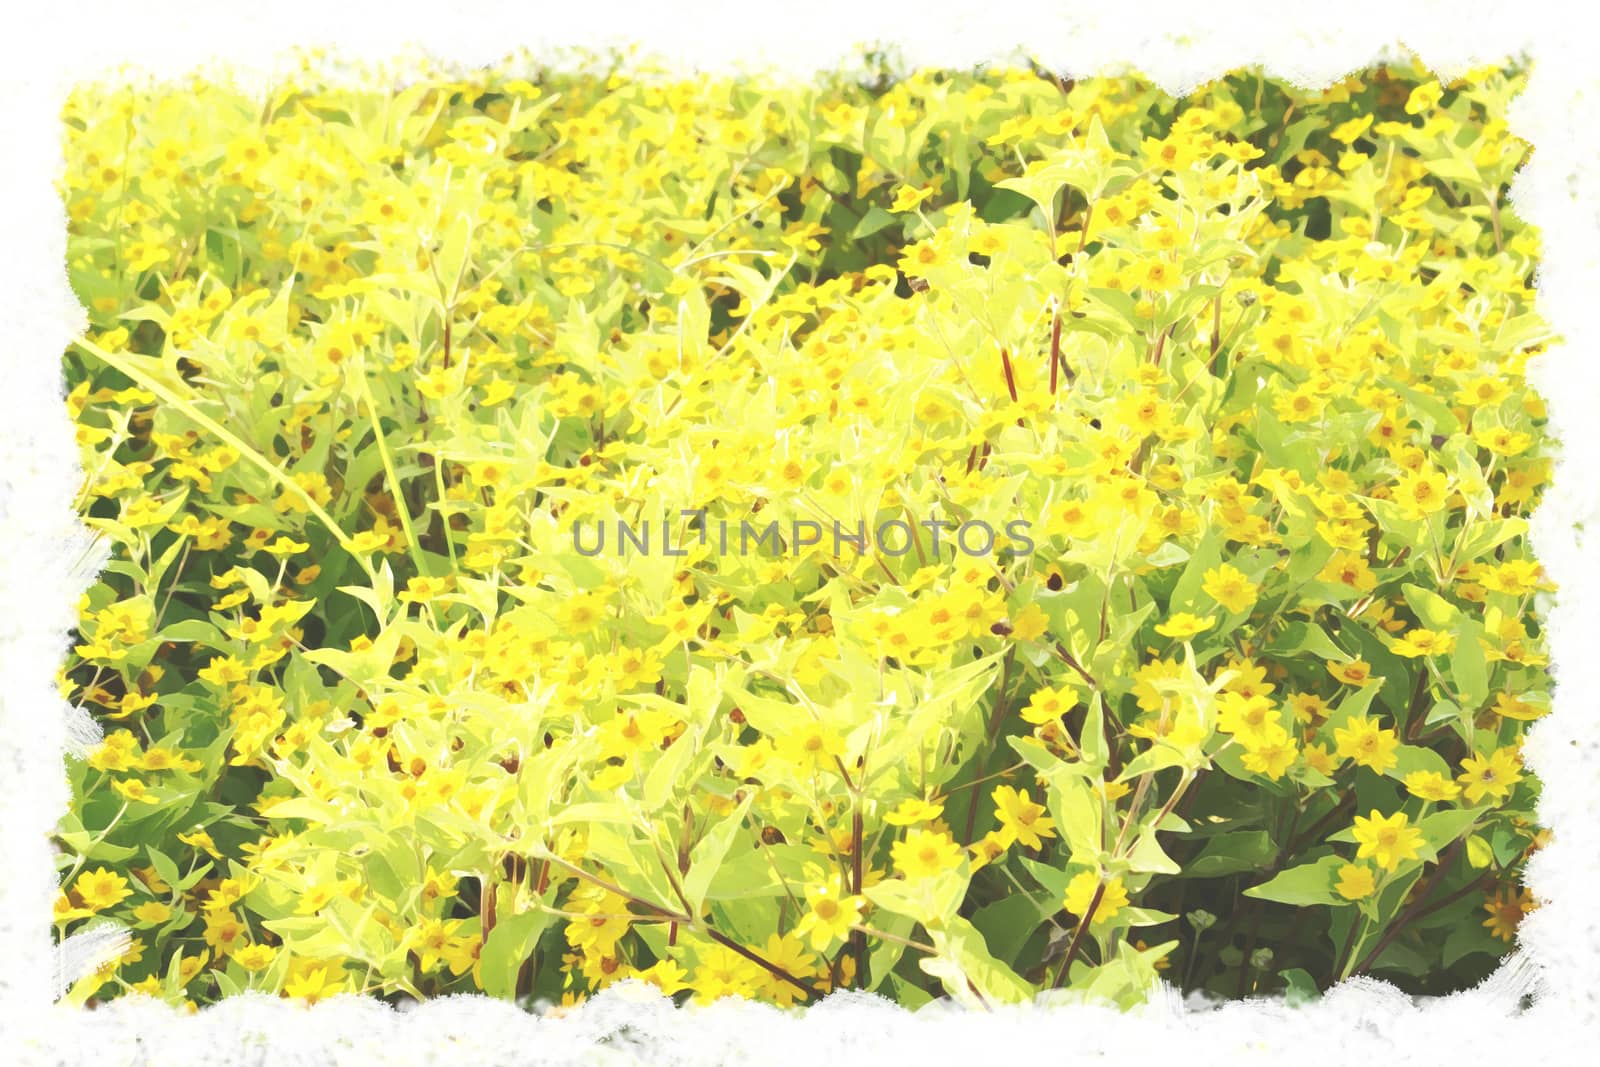 Postcard art concept yellow flowers water paint background